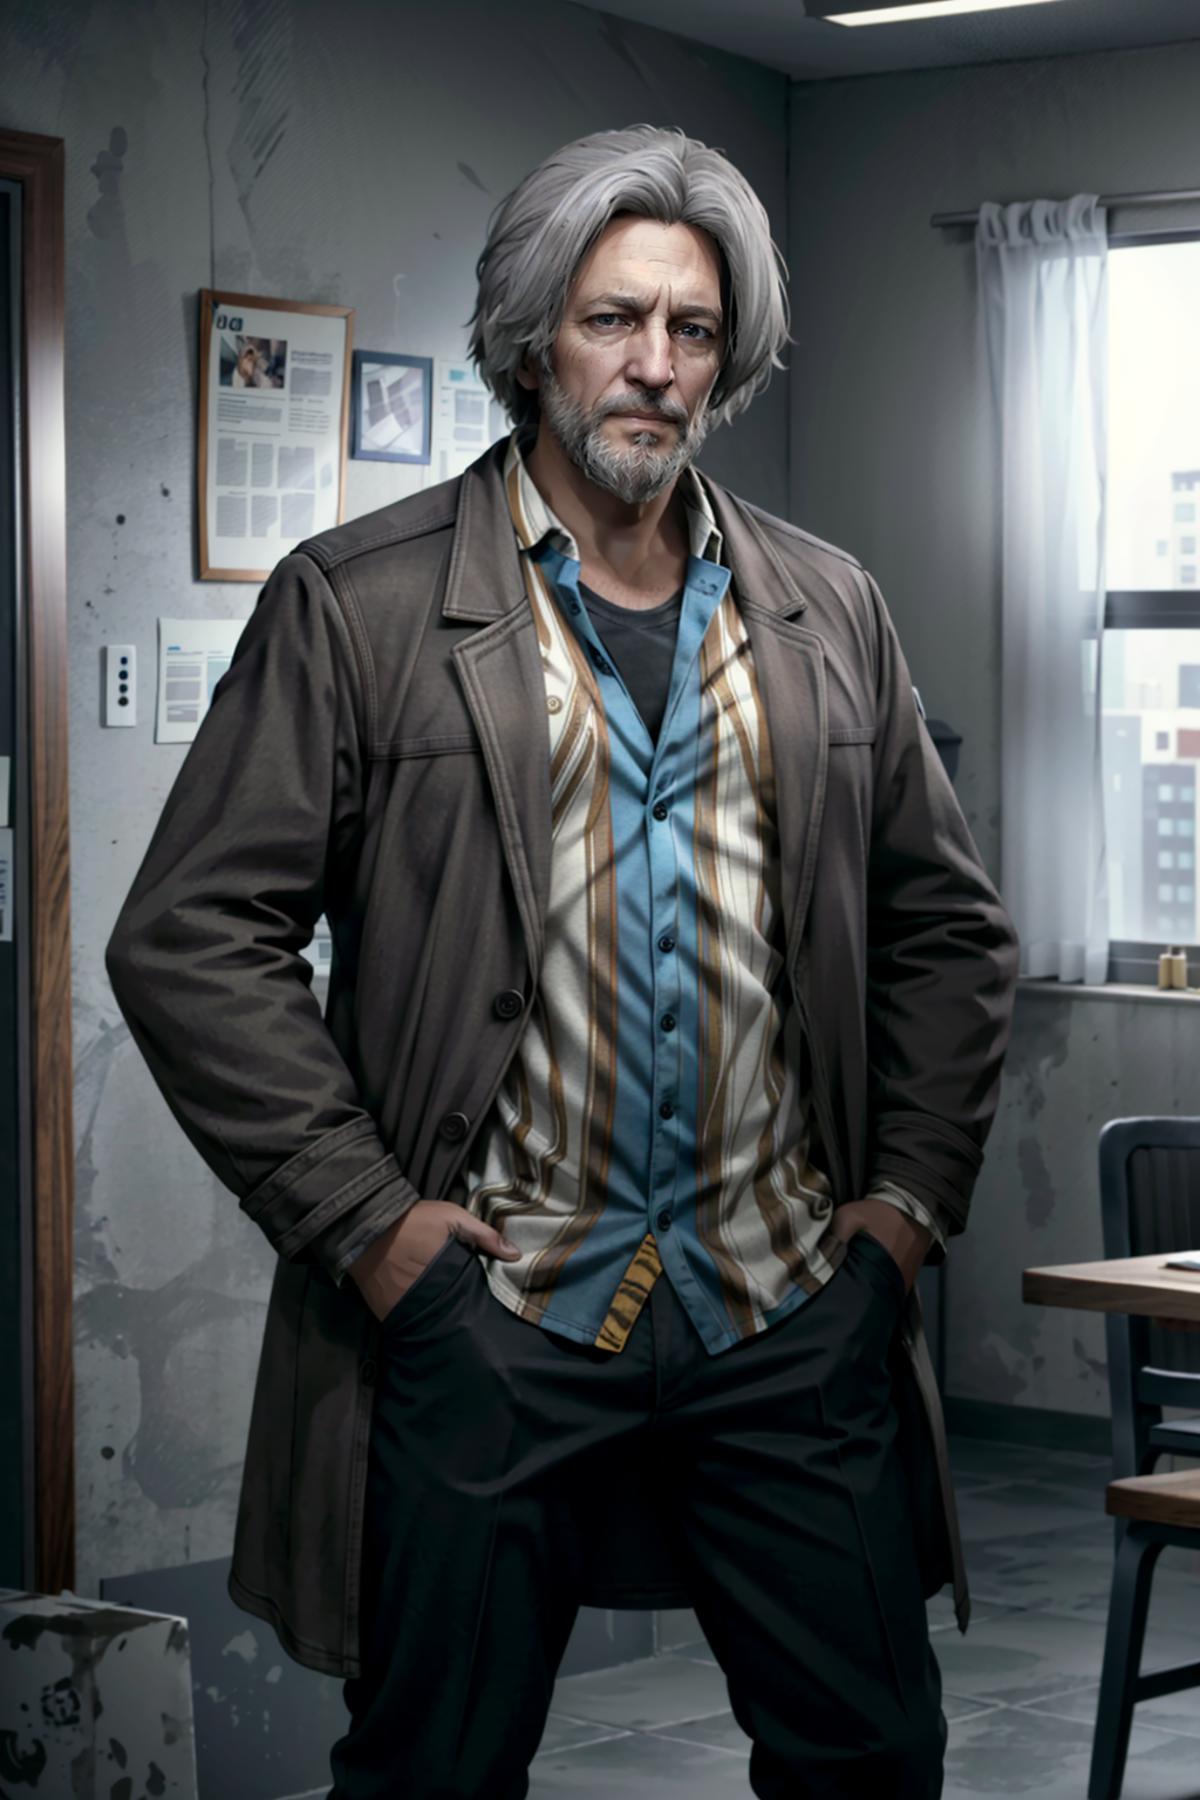 Hank from Detroit: Become Human image by BloodRedKittie